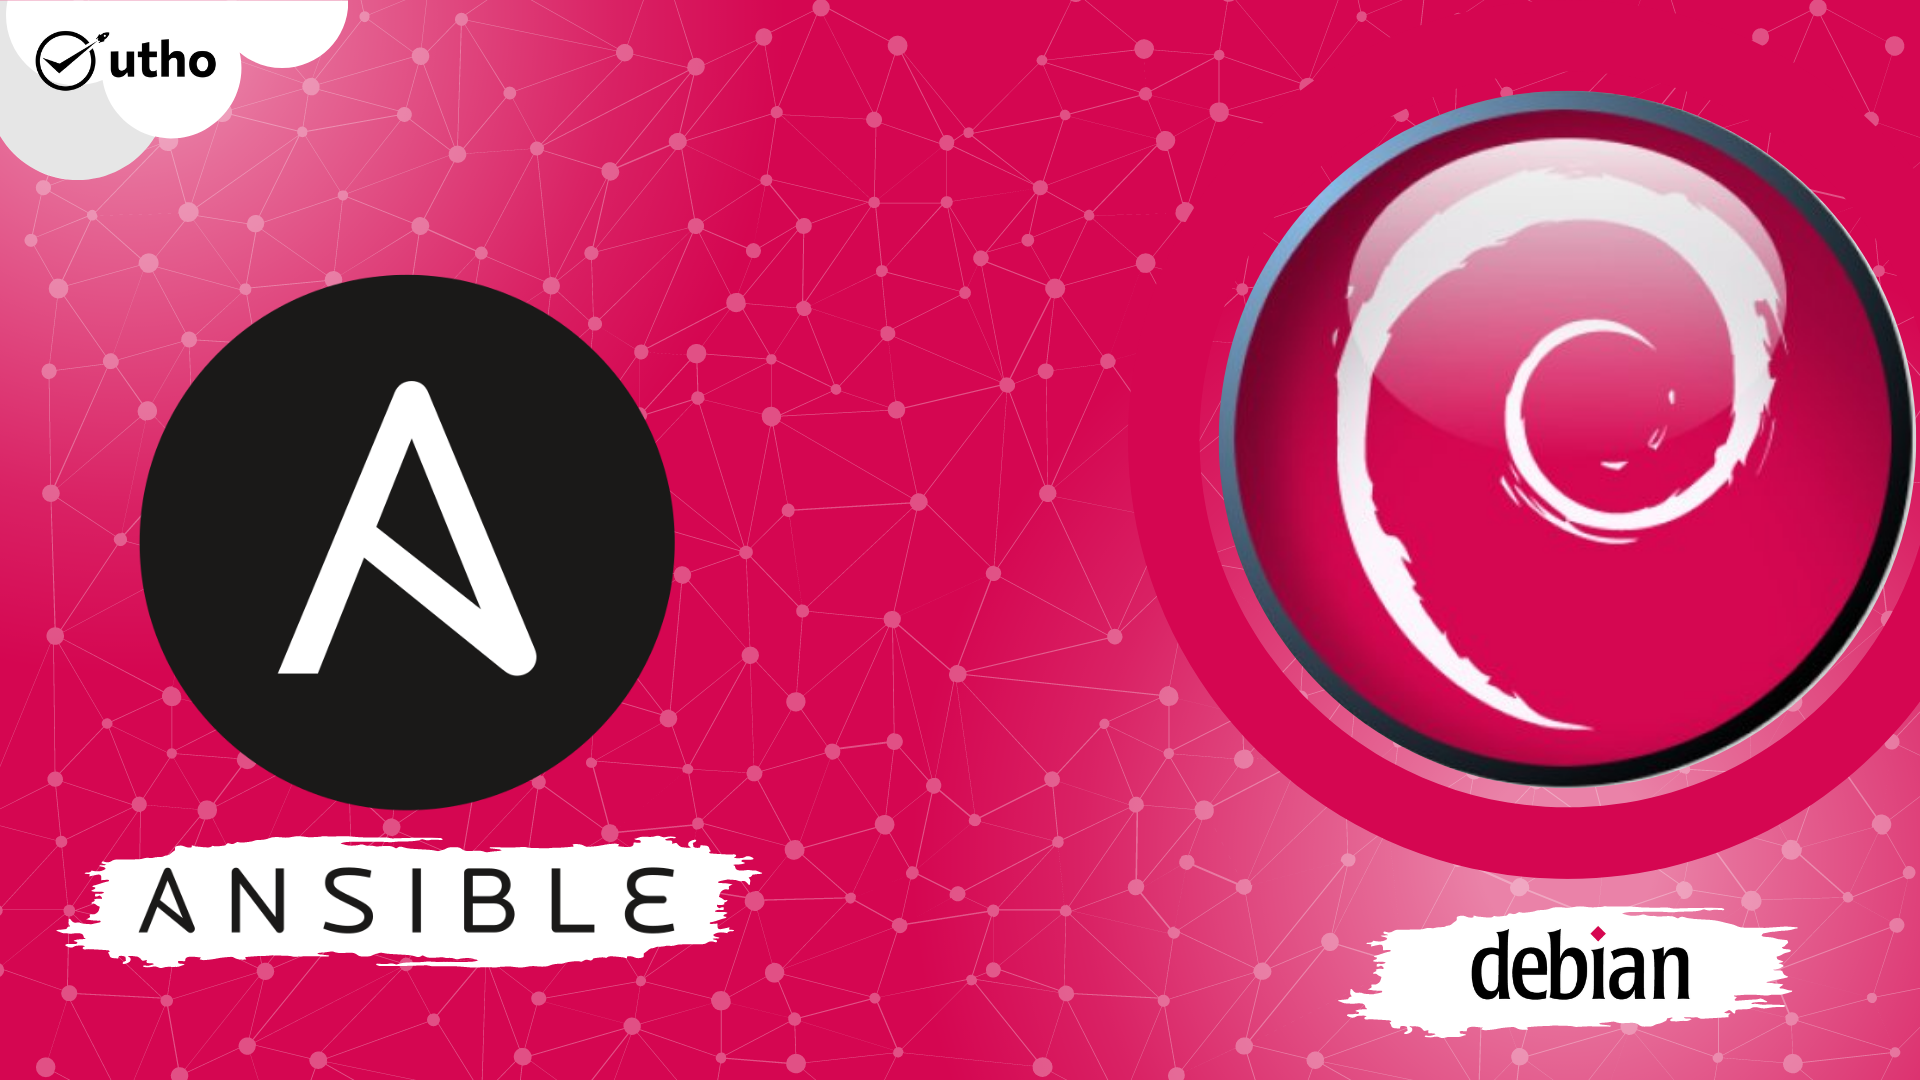 How to install Ansible on Debian server